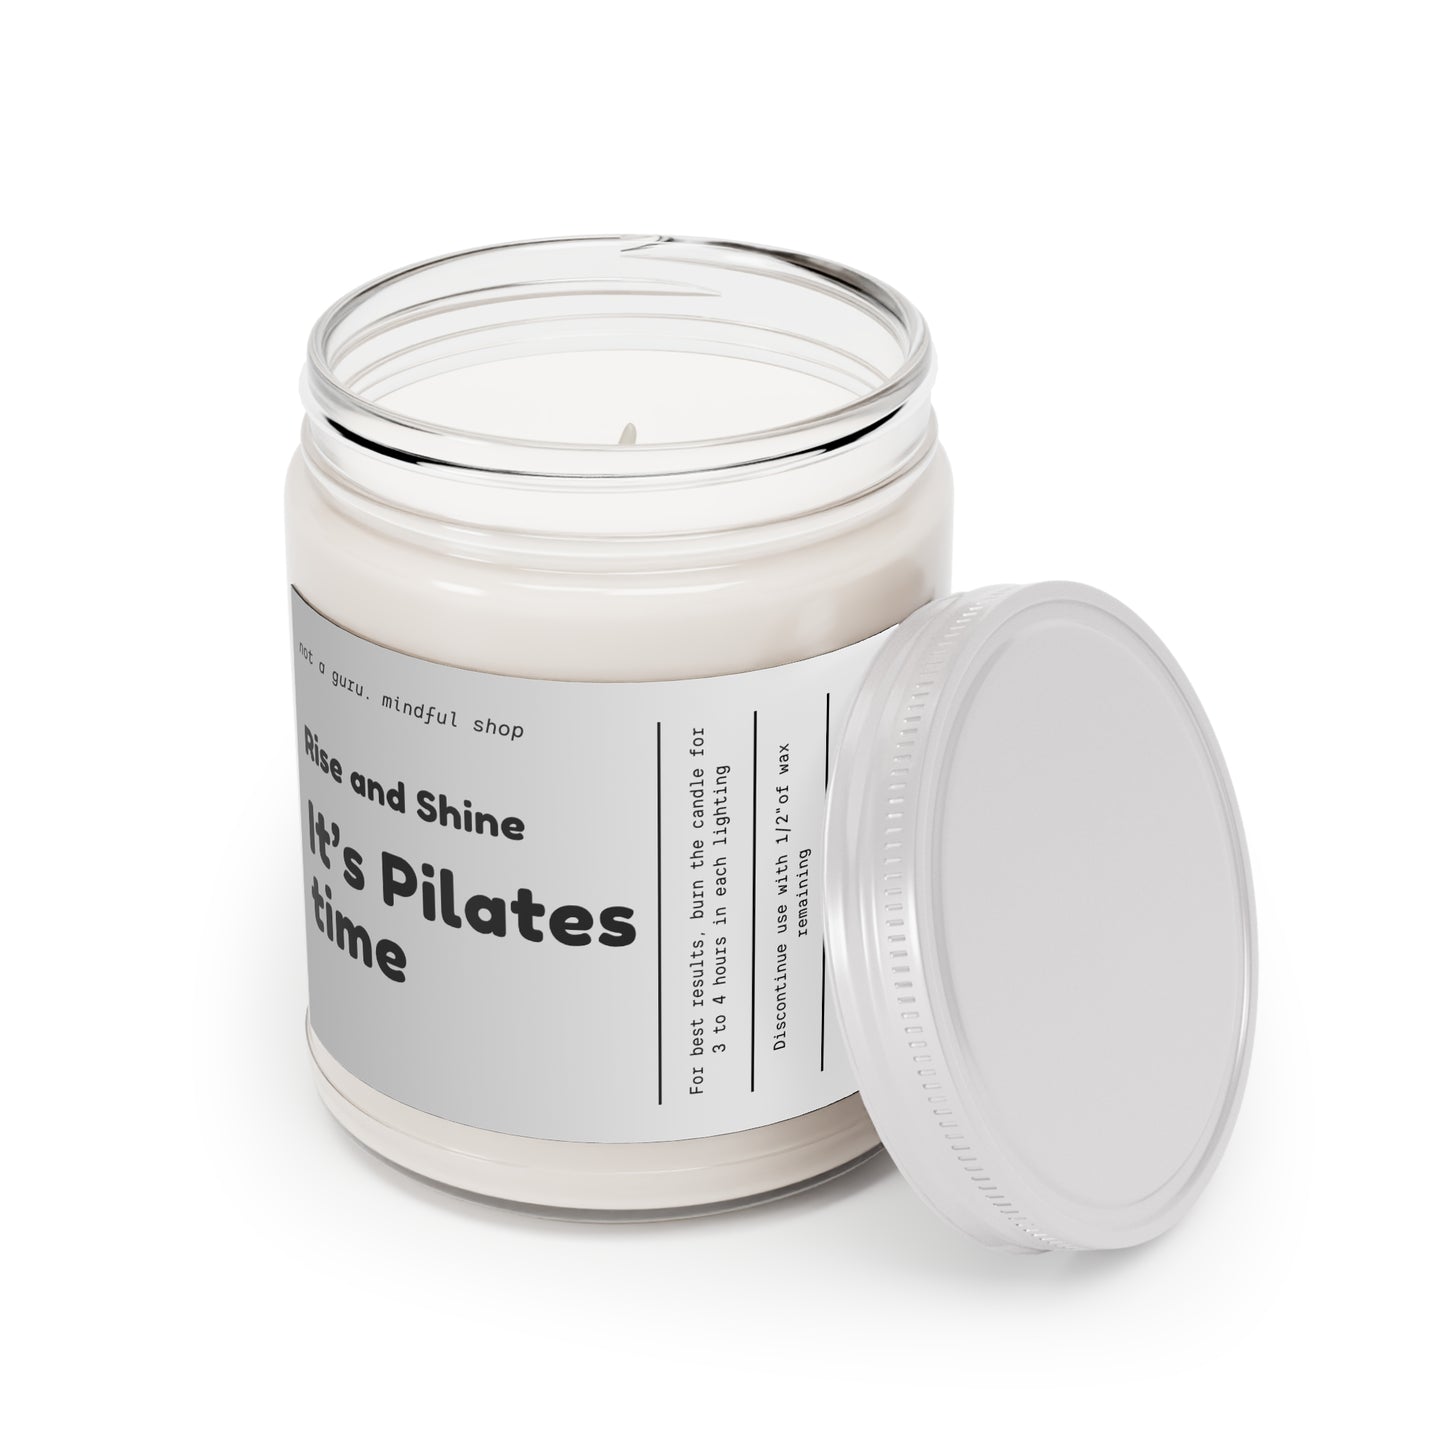 Rise And Shine It's Pilates Time Scented Candles